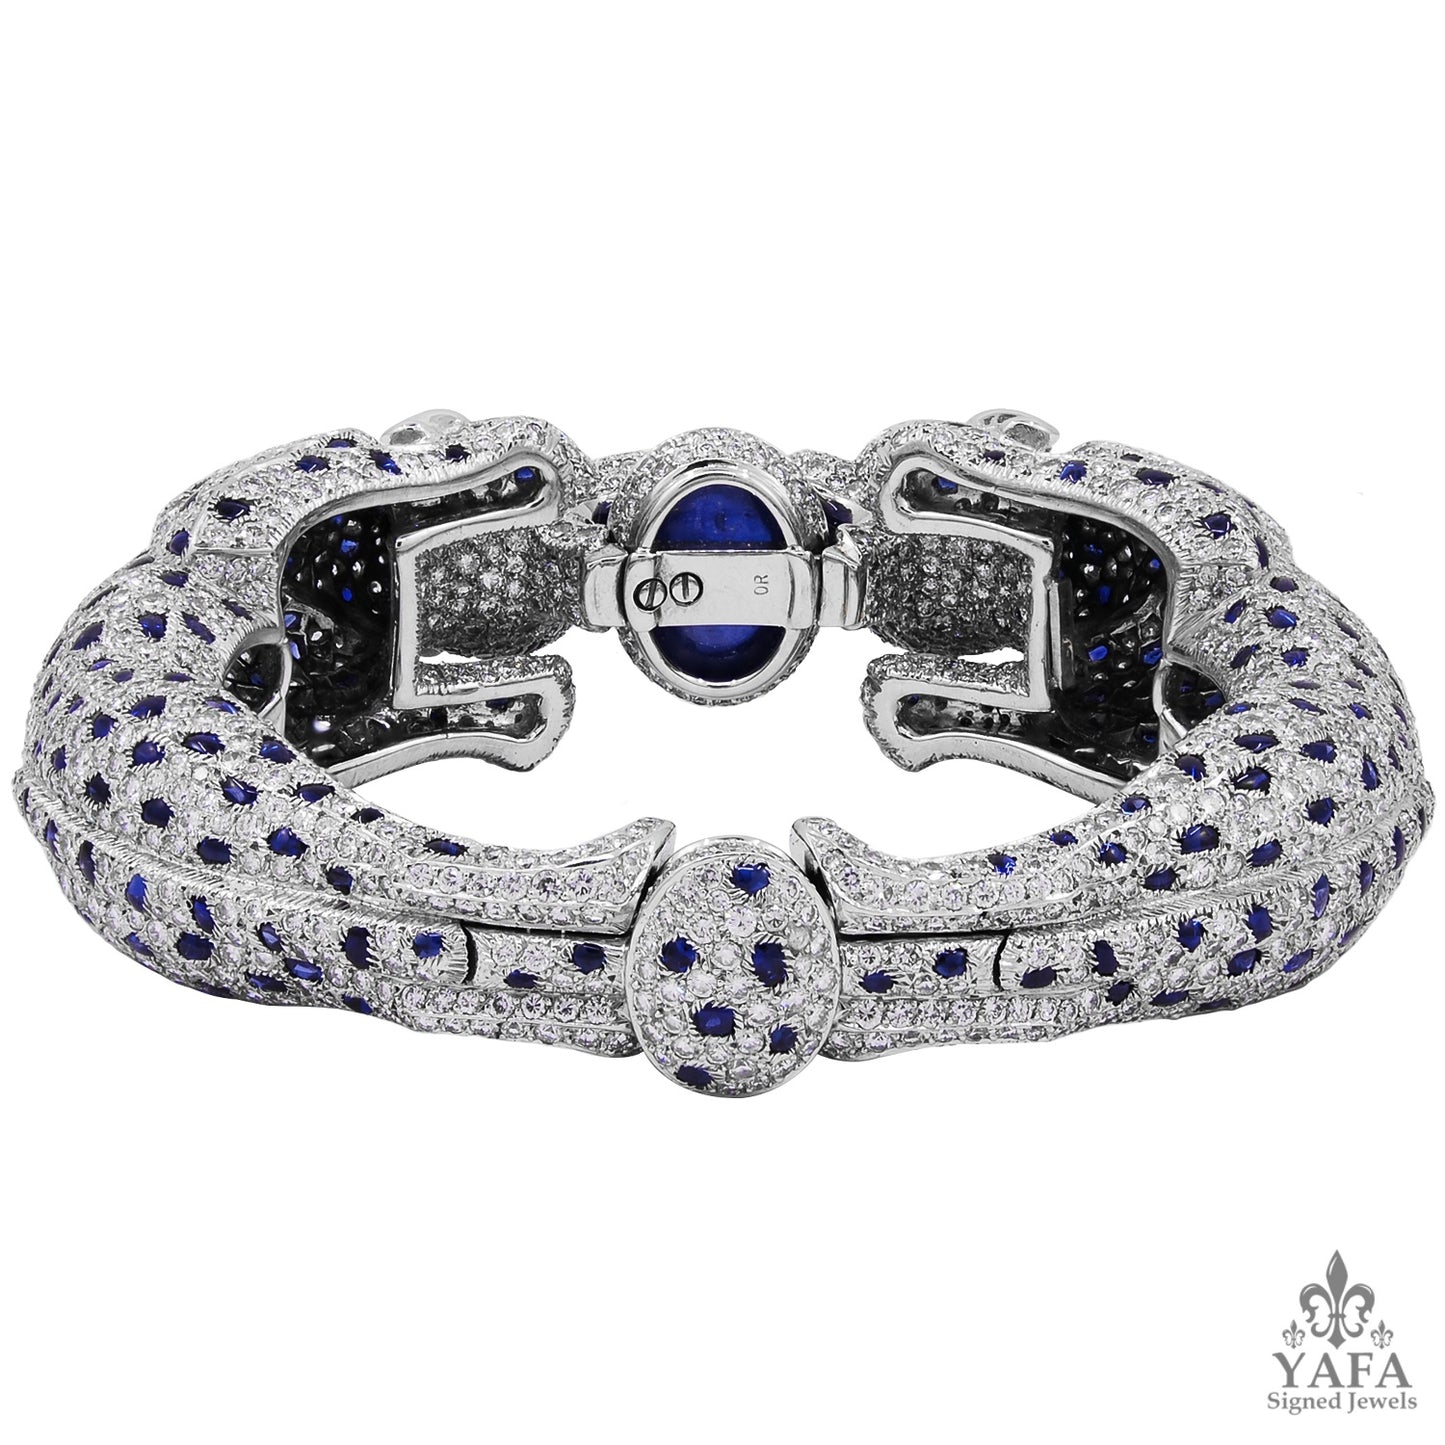 CARTIER Diamond and Sapphire Double Panther Bracelet